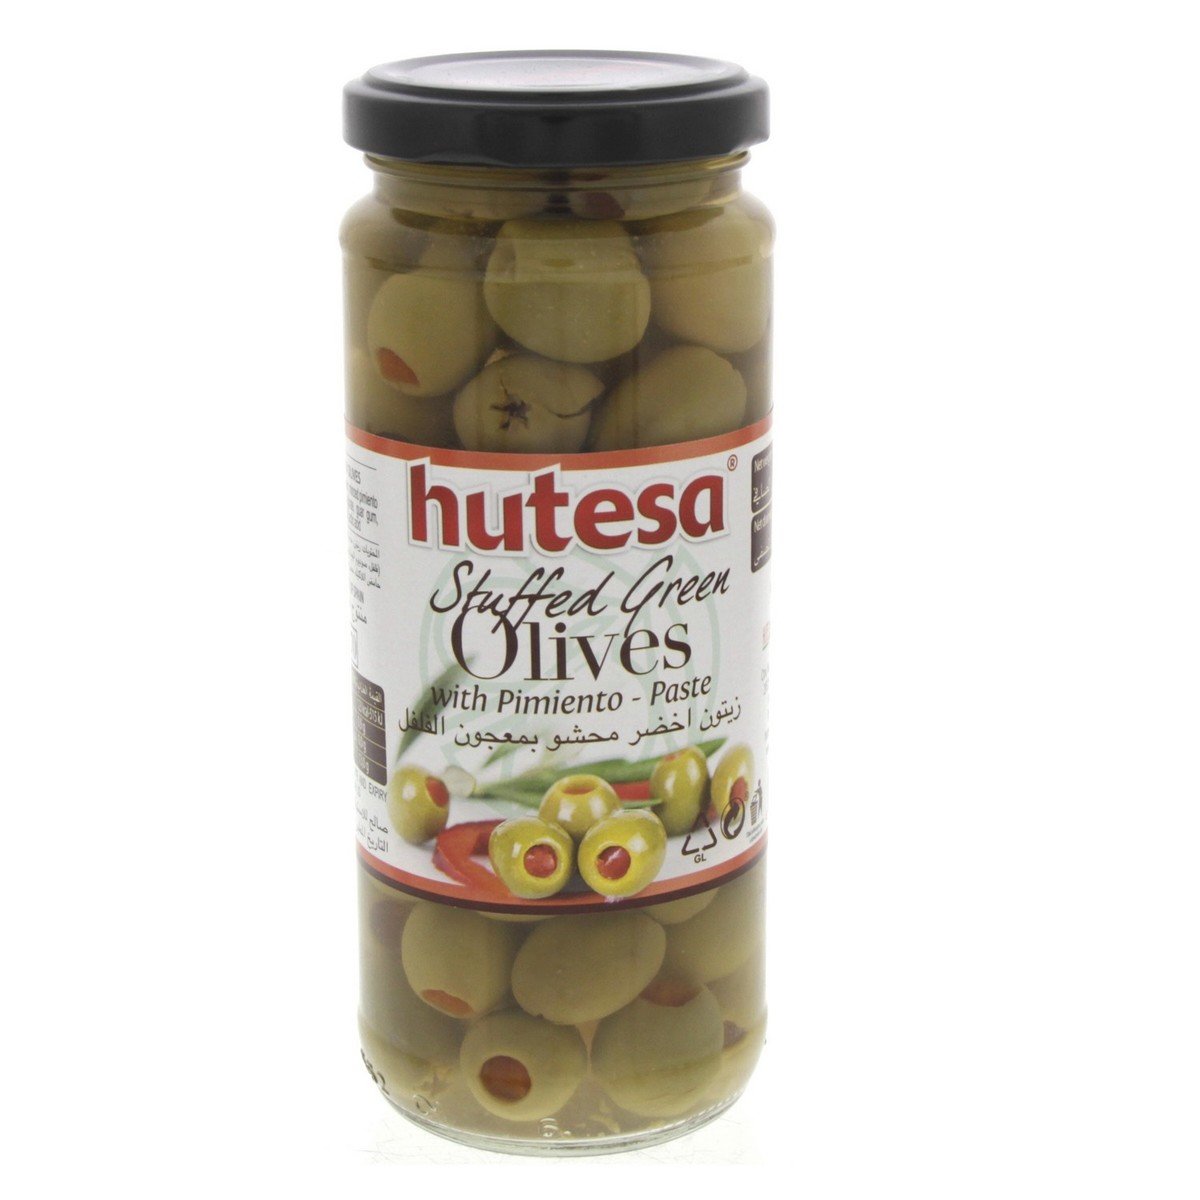 Hutesa Stuffed Green Olives with Pimiento Paste 200g